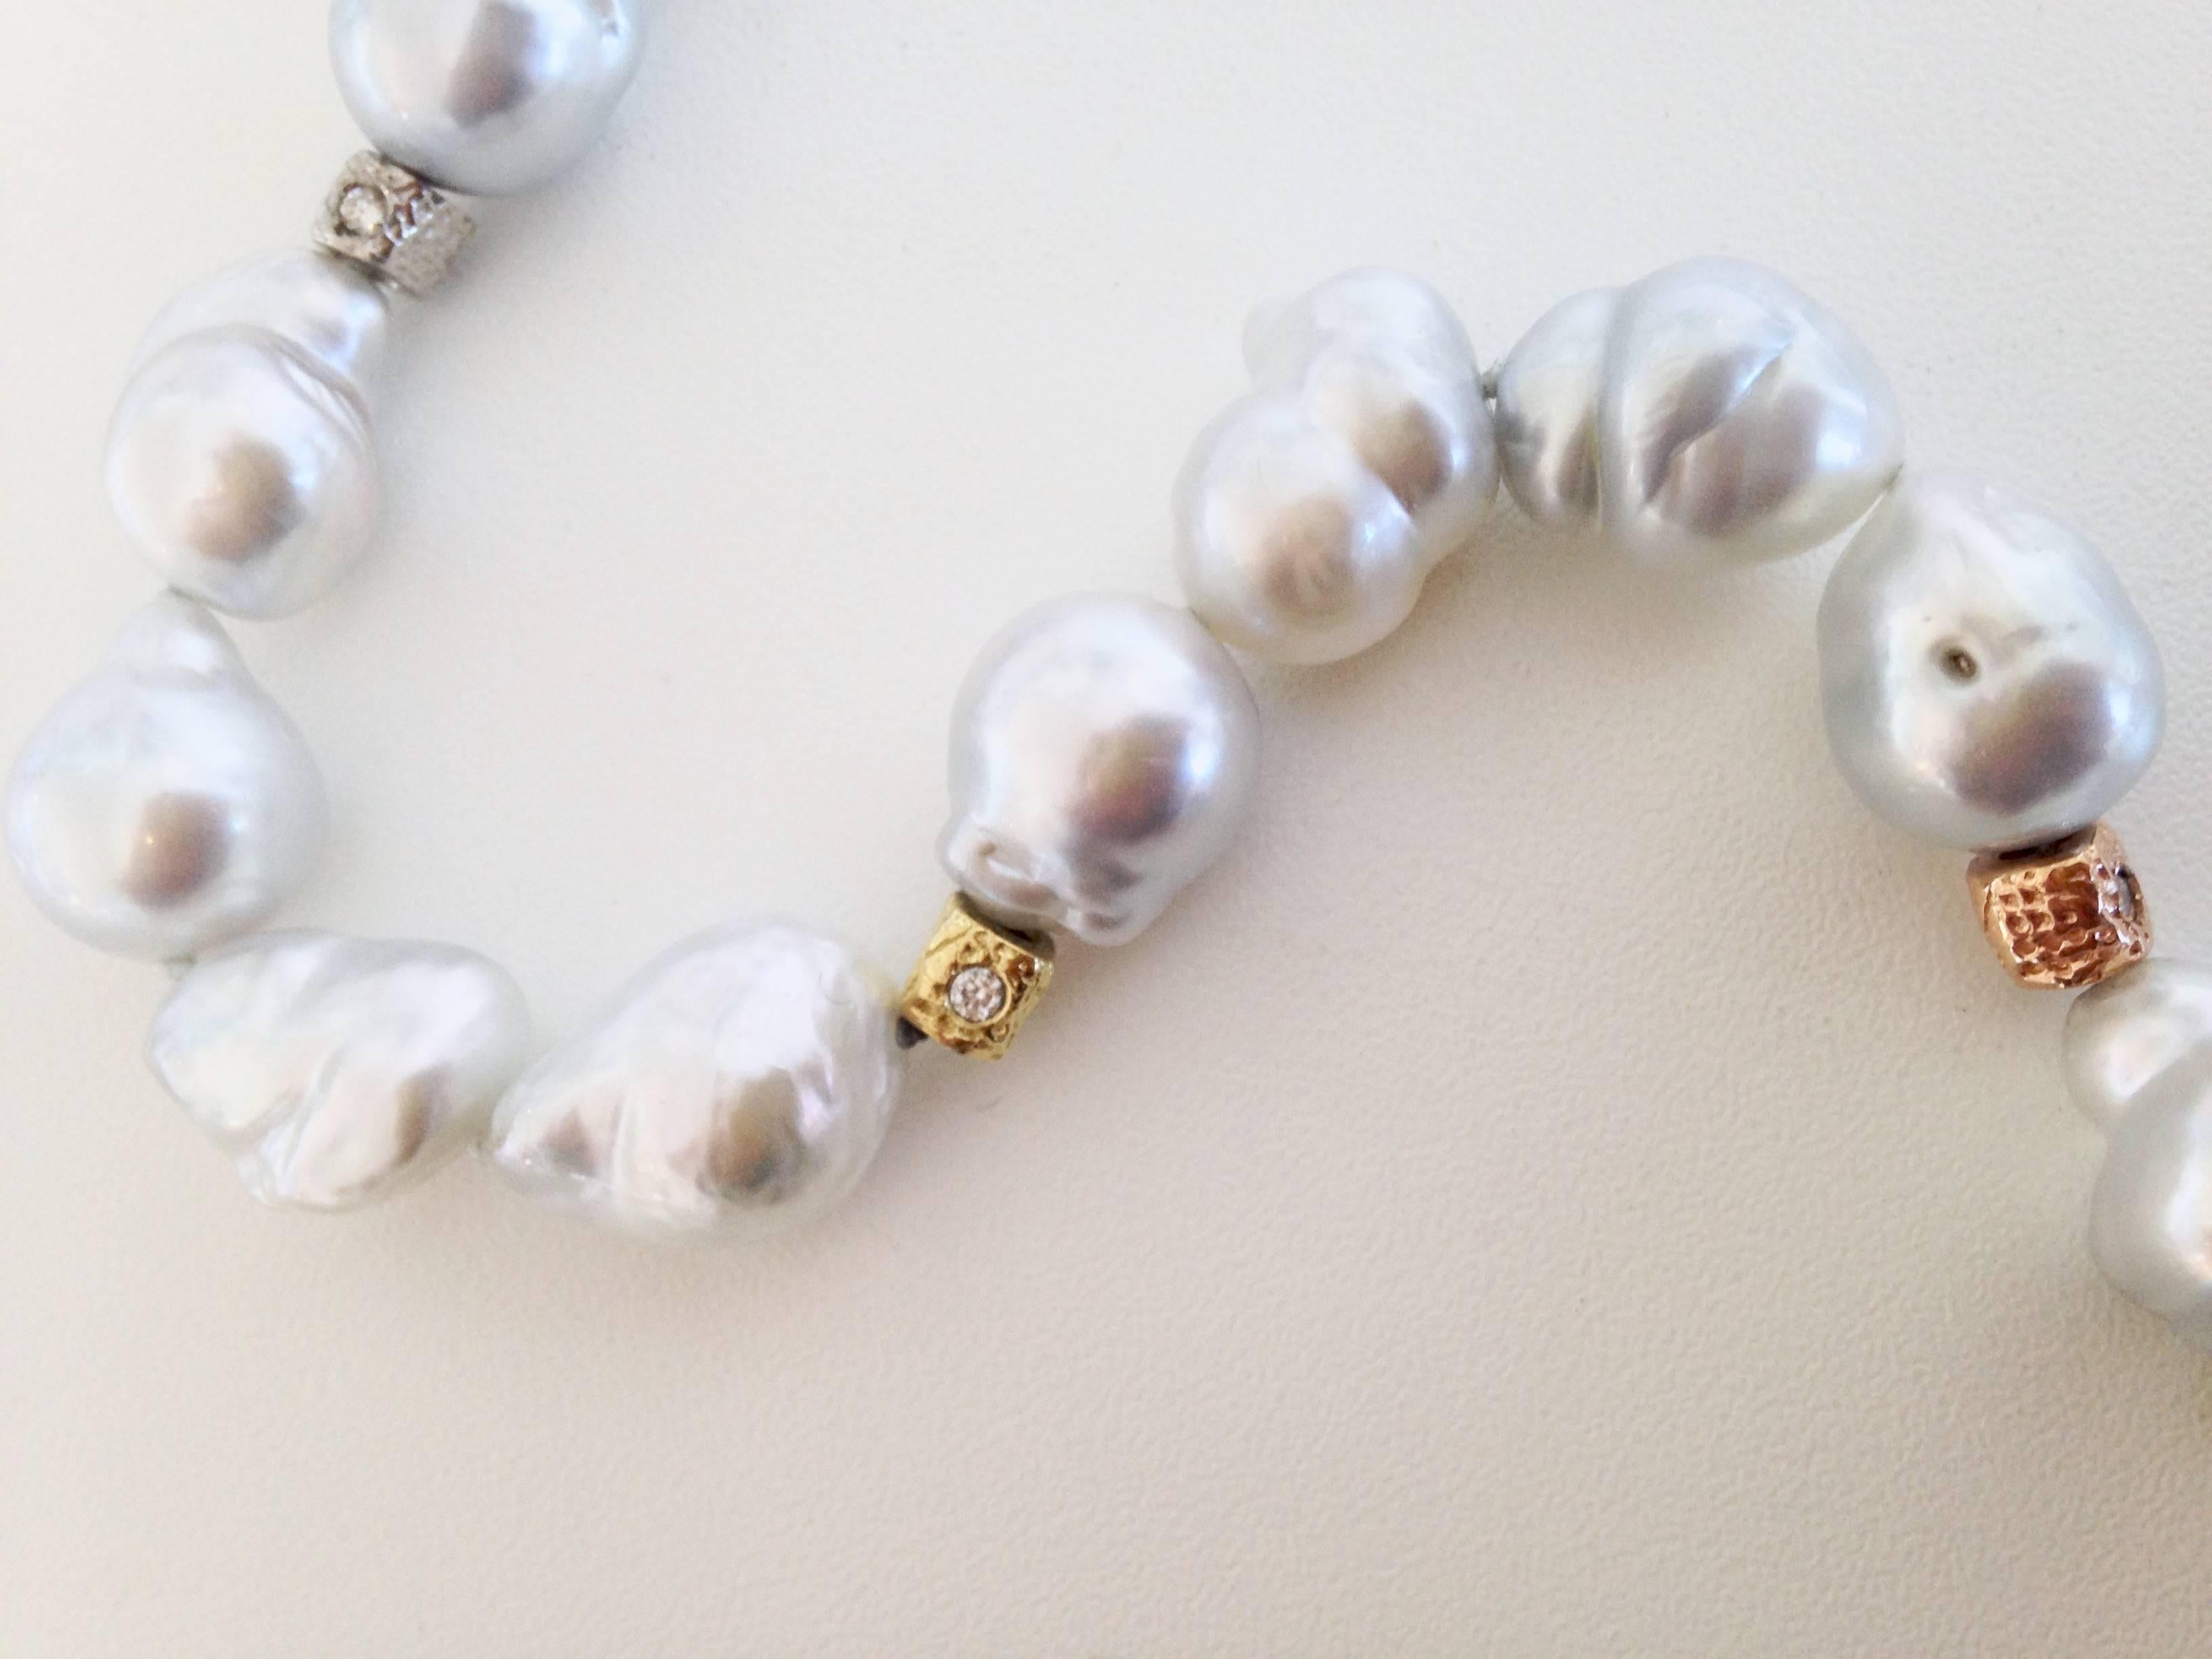 In this piece Susan has combined the alluring color and form of Silver-White Baroque Pearls with Yellow, Pink and White Gold Beads inlaid with Diamonds.  This artful and detailed strand is finished with one of Susan's 18kt Yellow Gold and Diamond